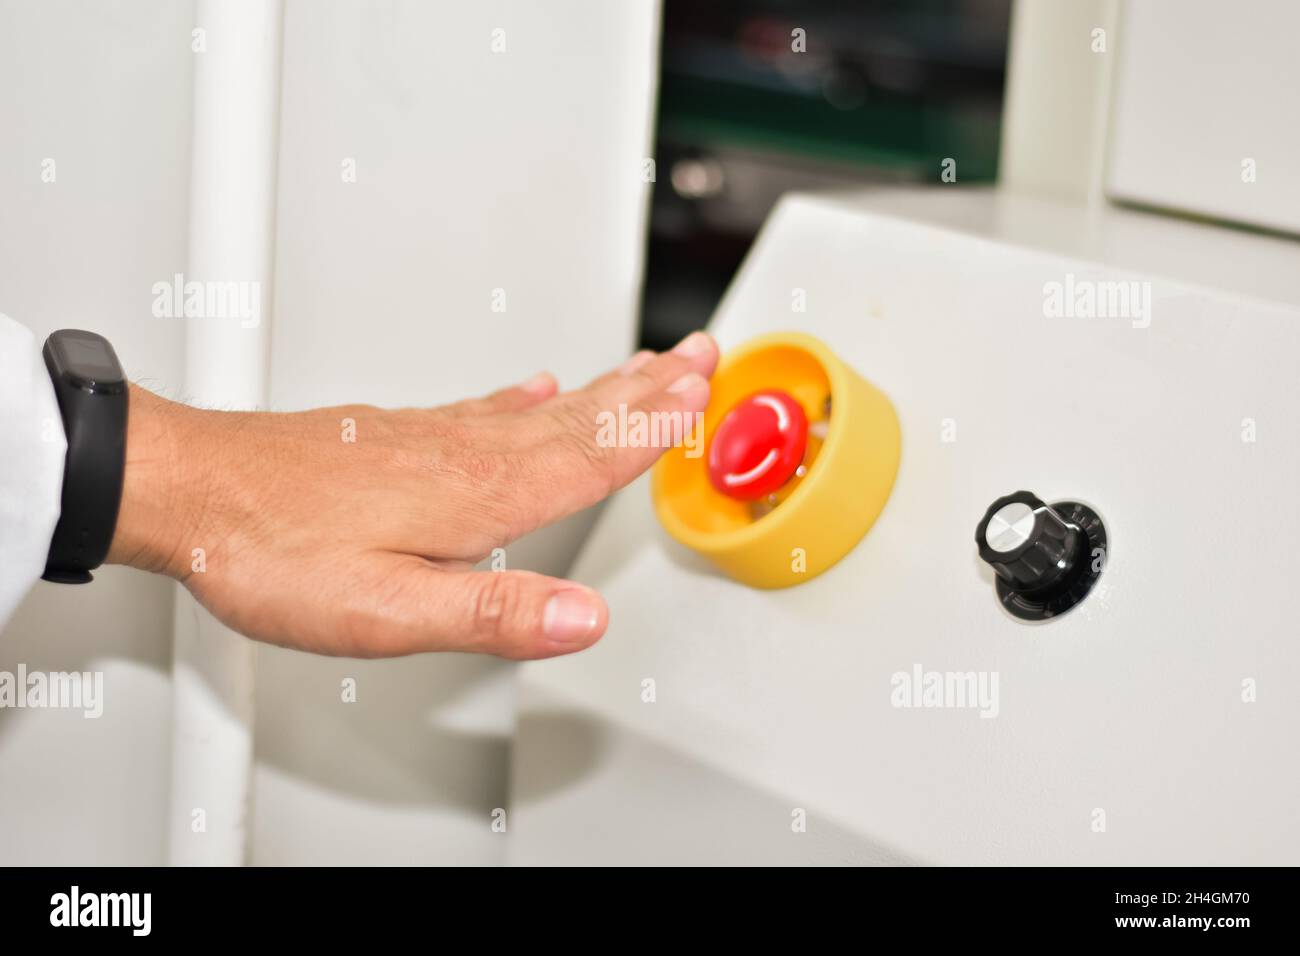 Hand touch on emergency stop machine Stock Photo